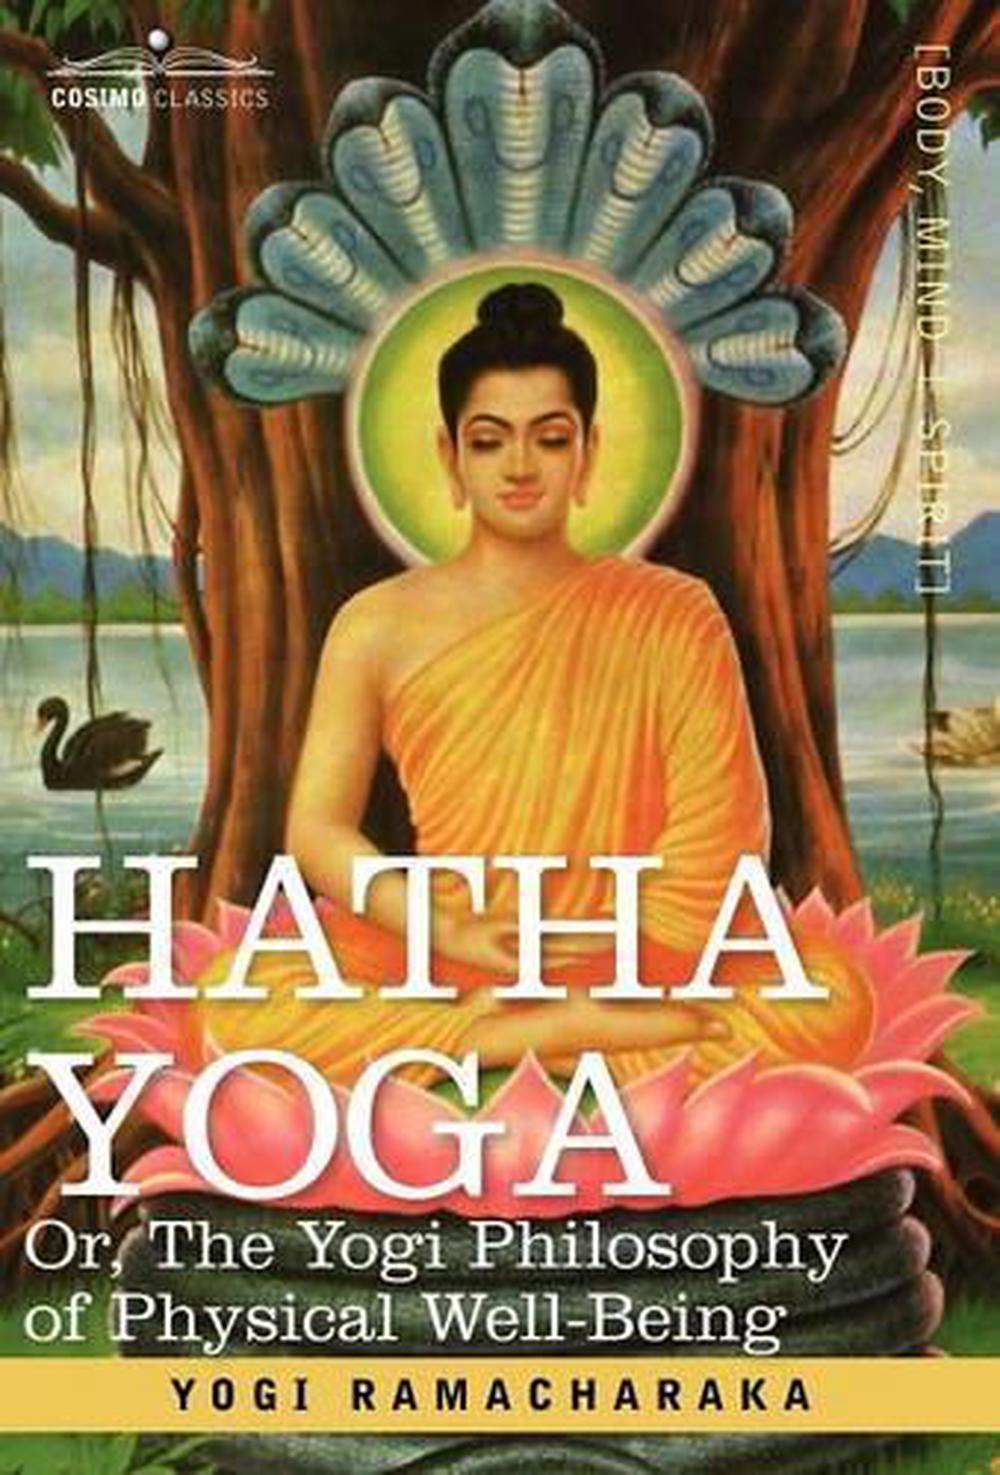 hatha yoga book from early 1970